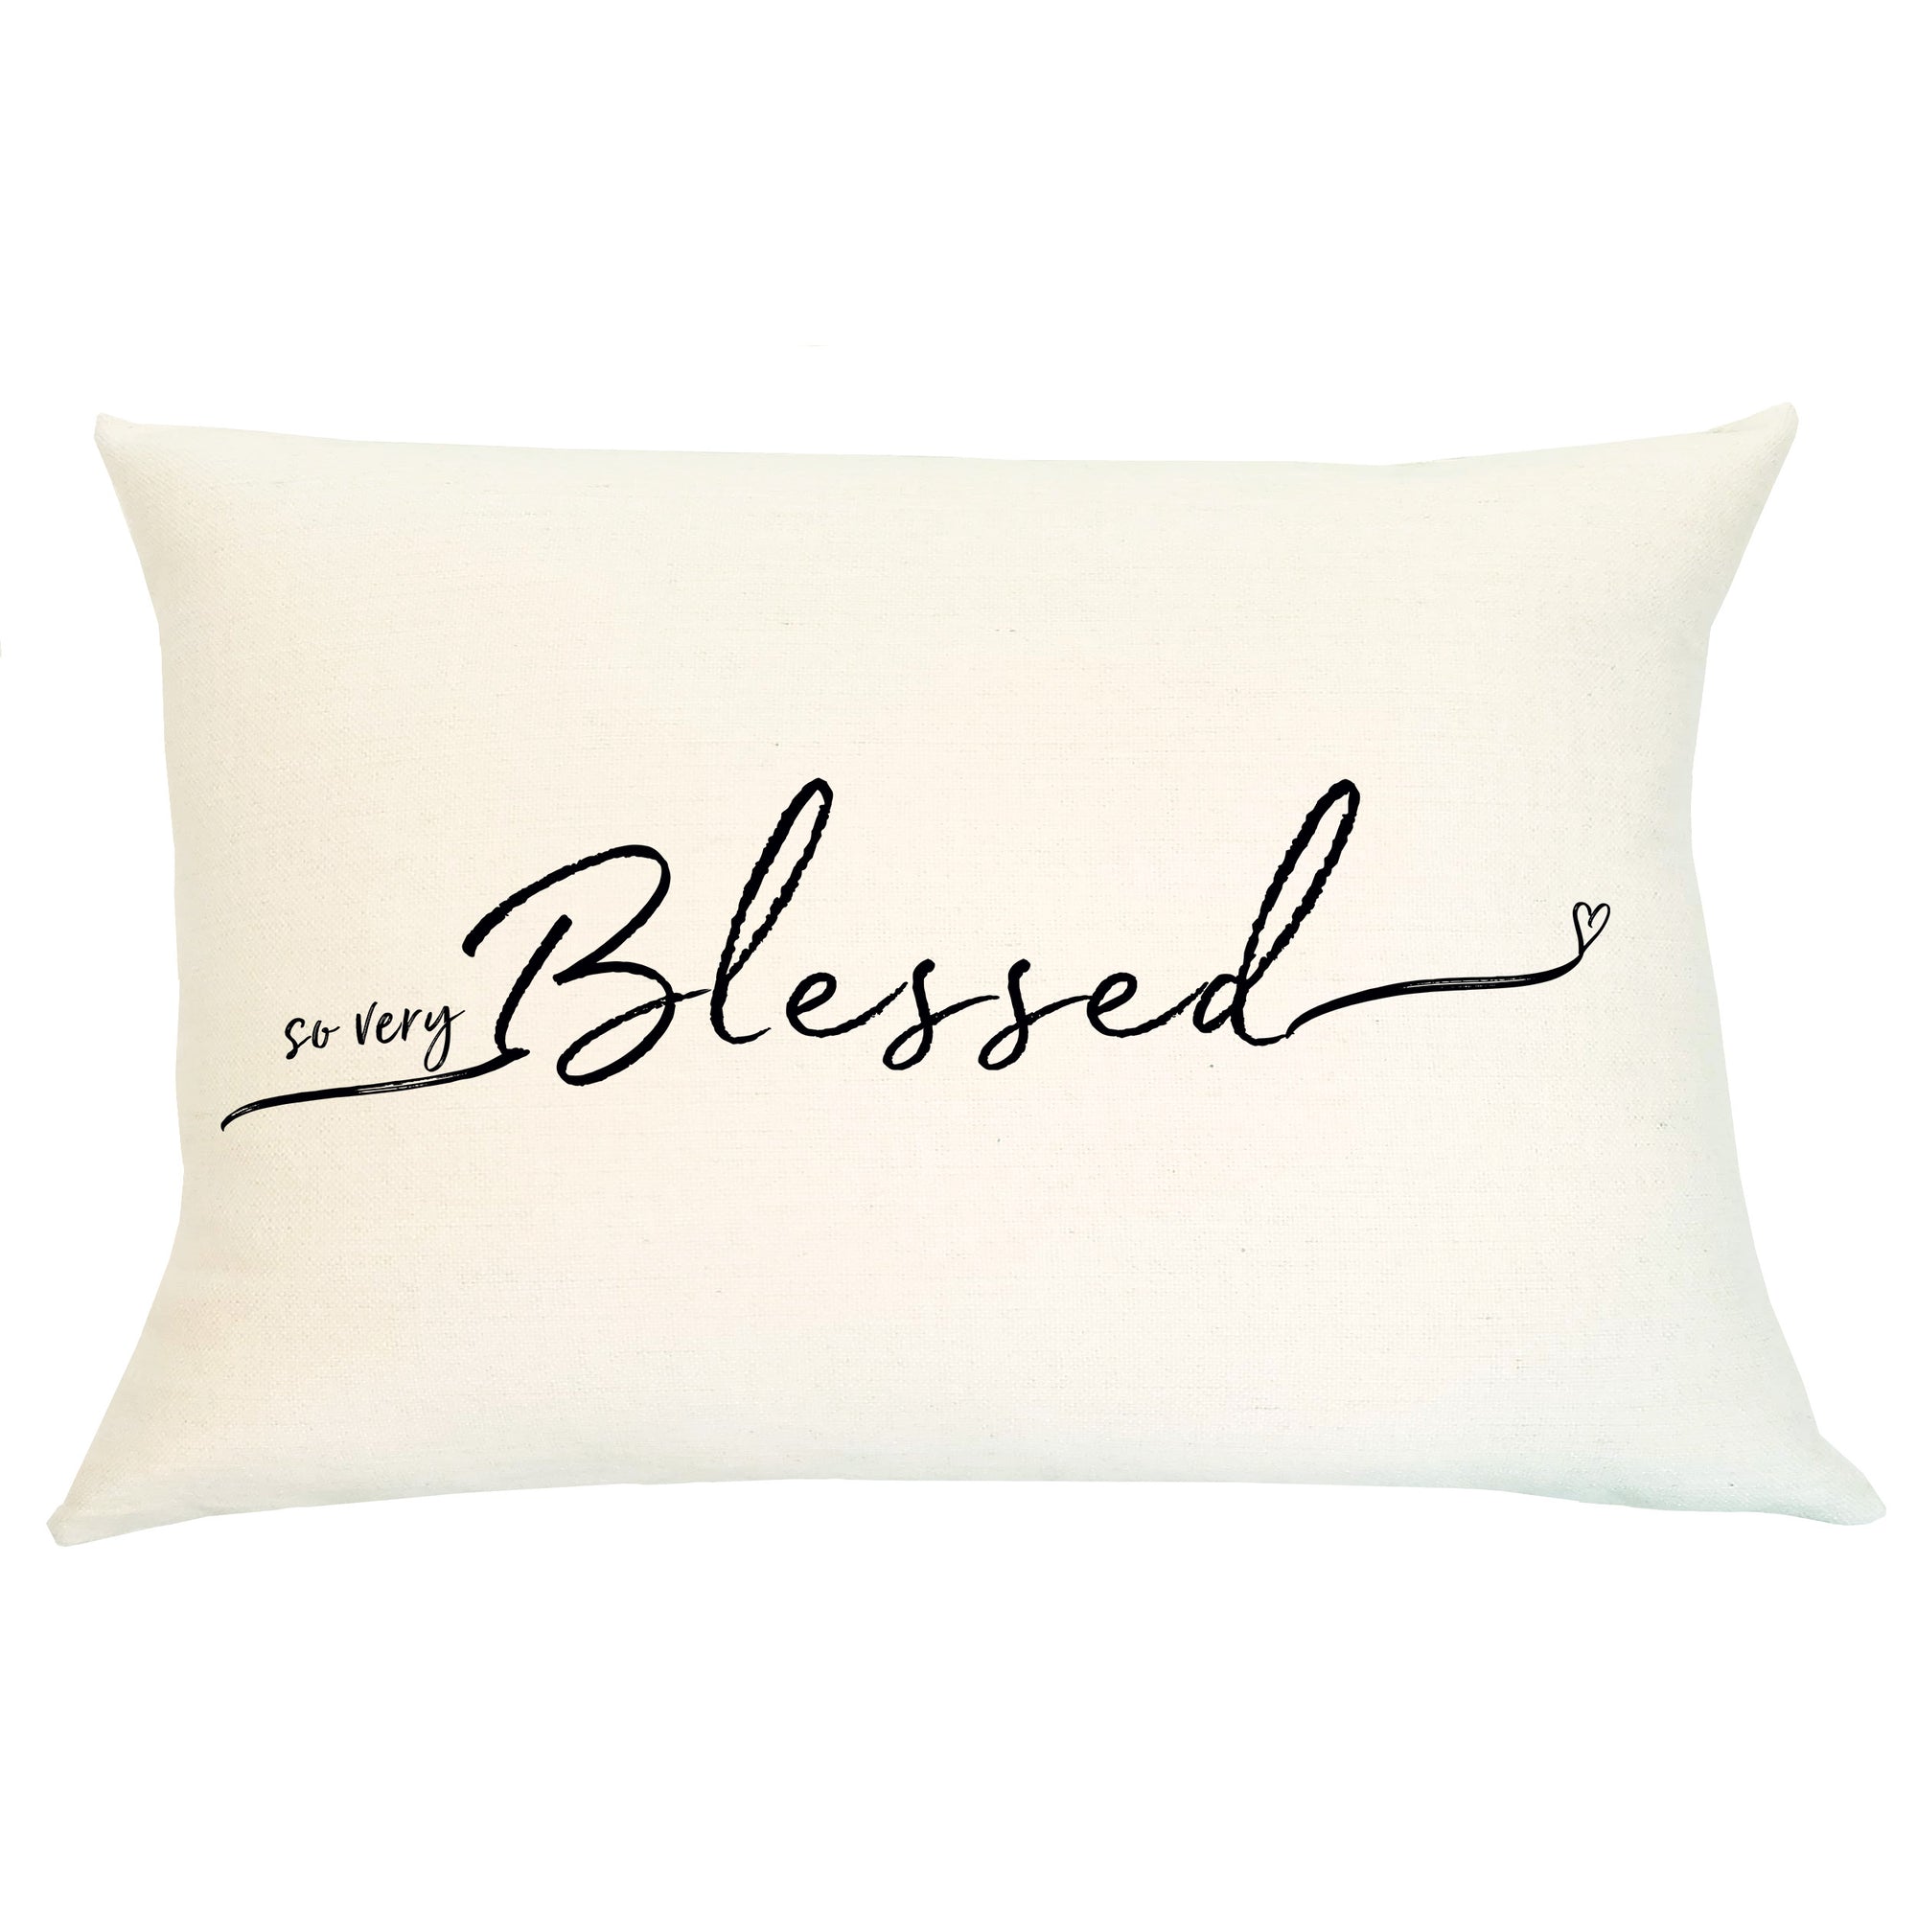 Pillow Lumbar - So Very Blessed - Insert Included